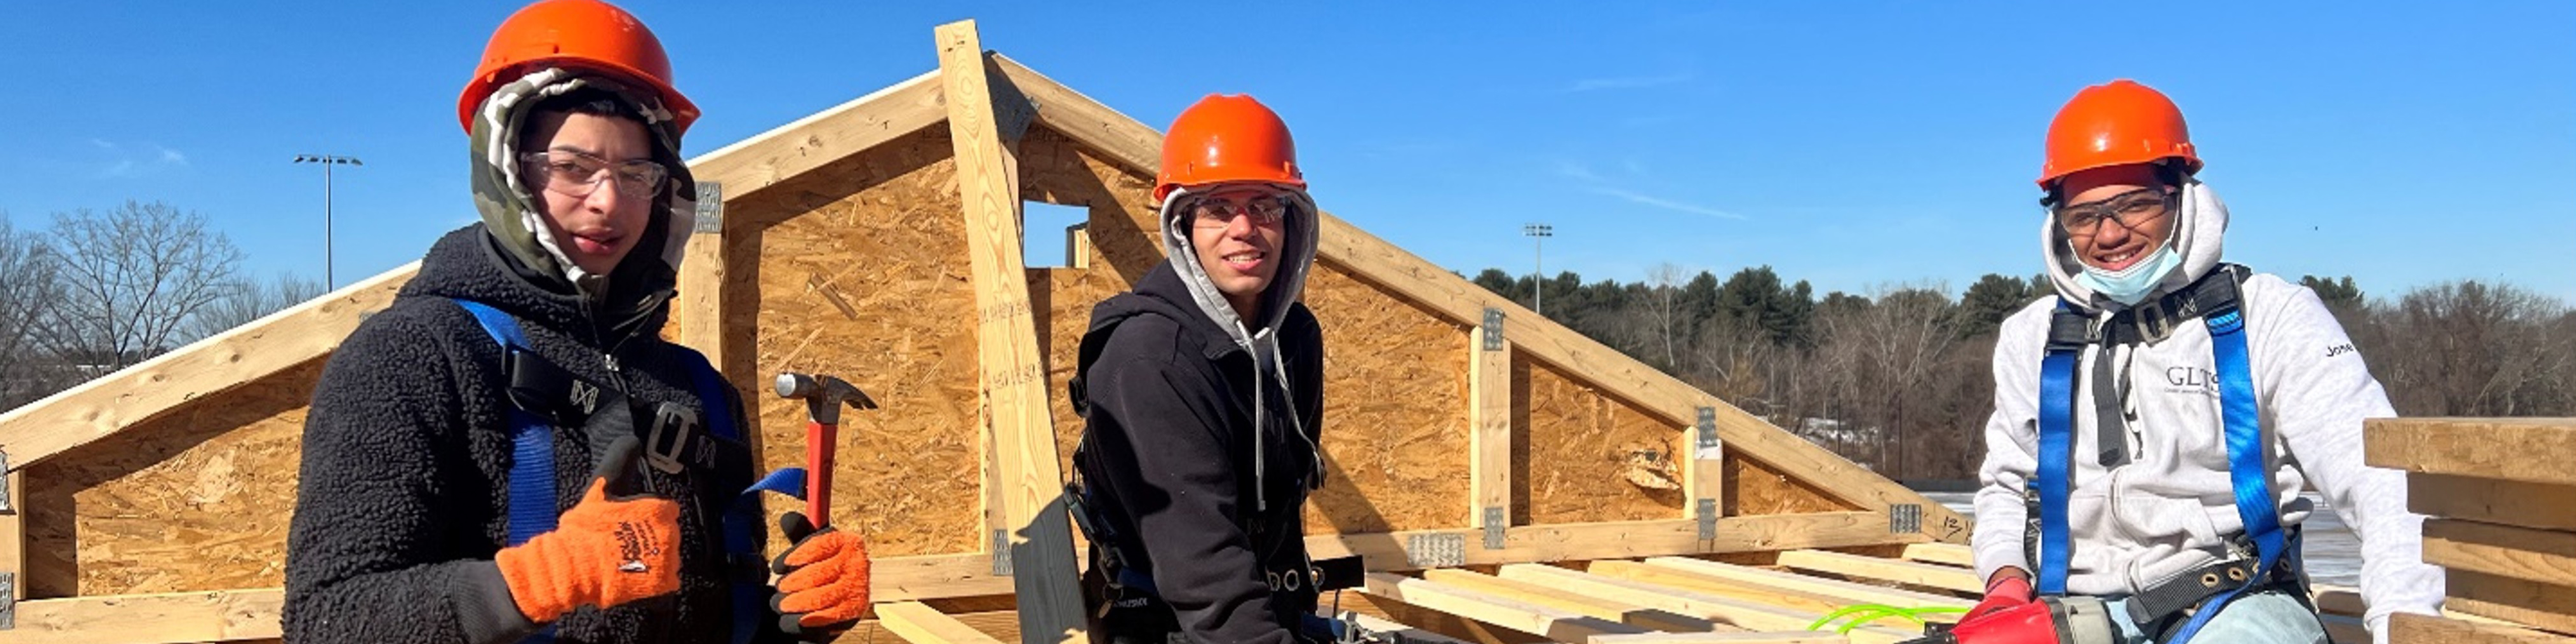 Three high school students in hard hats and coats hold tools and give thumbs up sitting atop wood on a house building project site